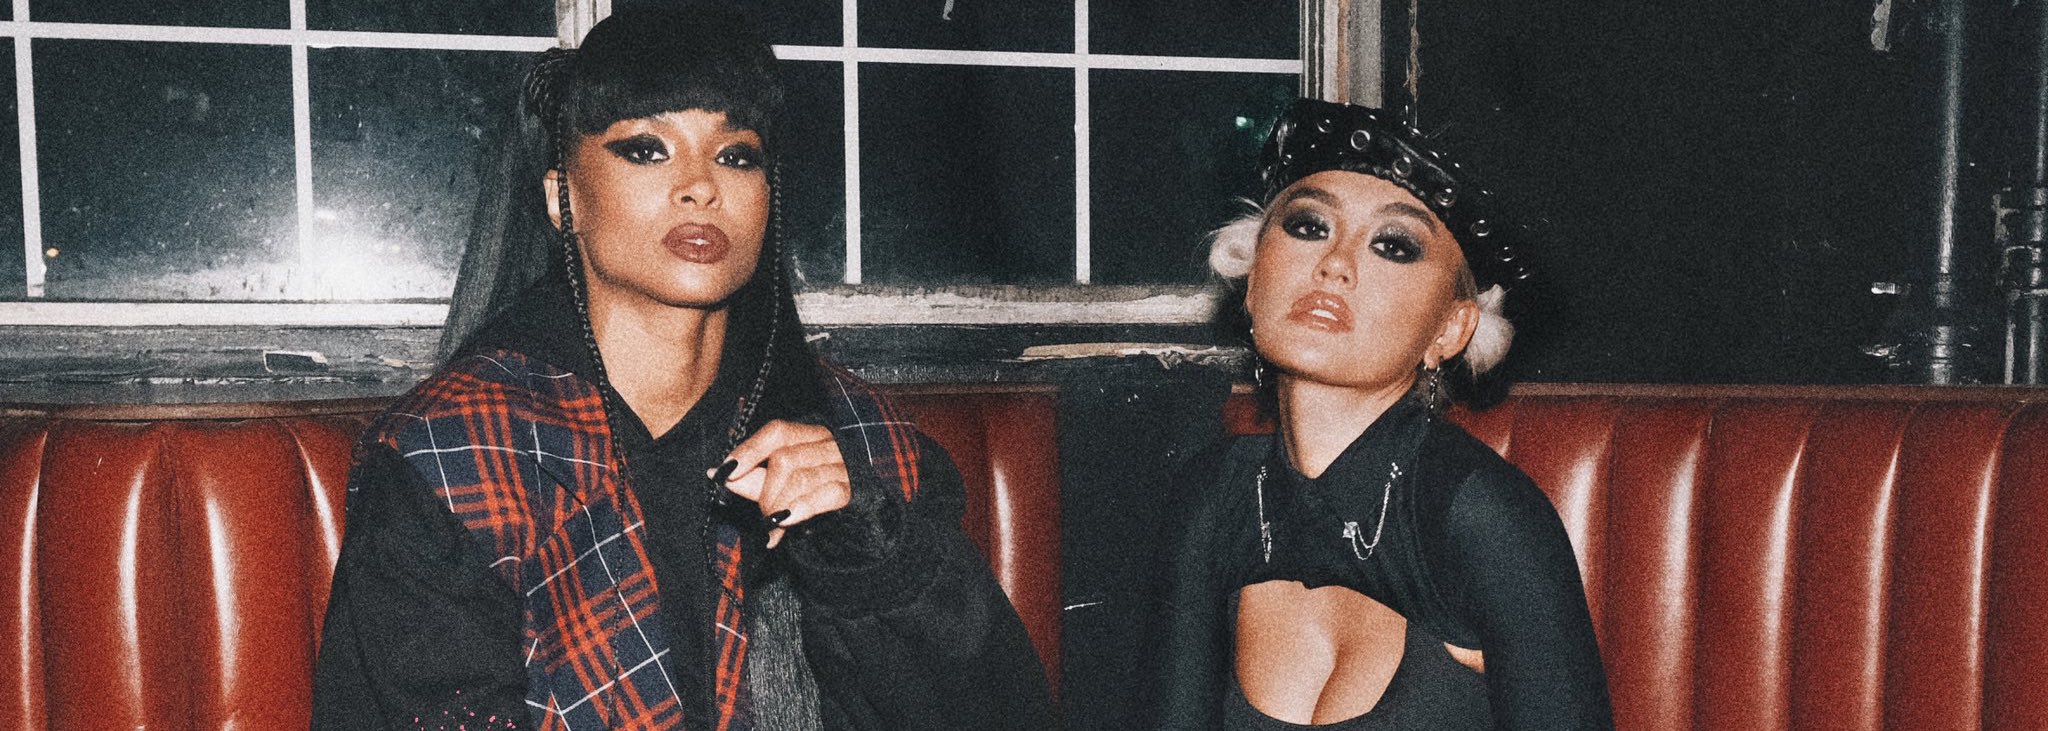 Behind the Scenes: Agnez Mo & Ciara’s ‘Get Loose’ Music Video [Watch]